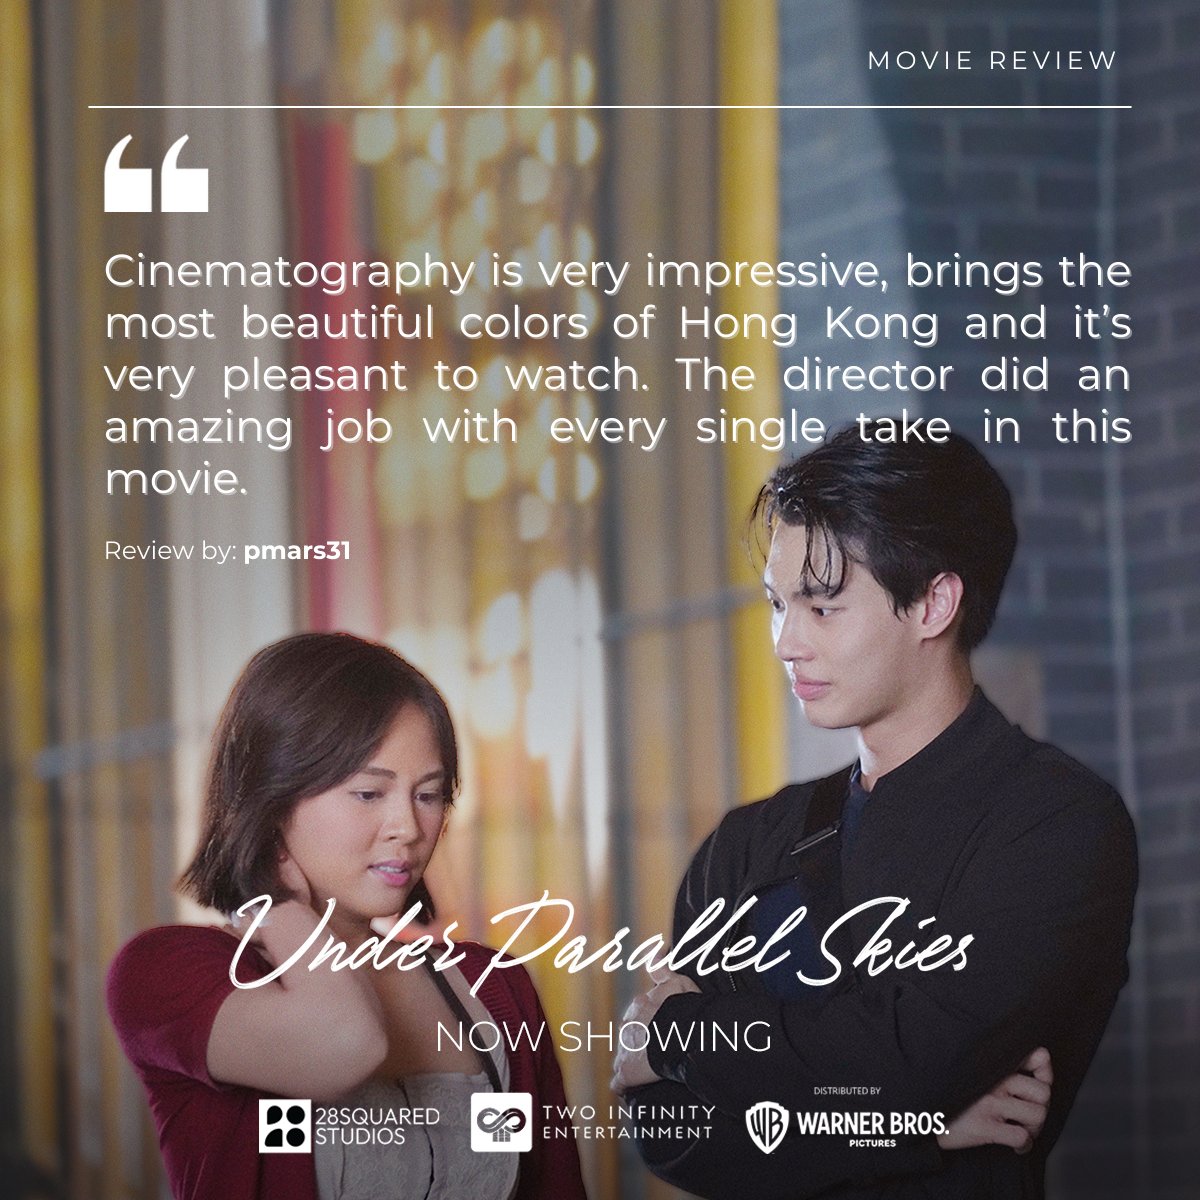 MOVIE REVIEW: Cinematopgraphy is very impressive, brings the most beautiful colors of Hong Kong.

Catch #WinMetawin and #JanellaSalvador in one of the most anticipated film collaborations of the year in Asia, #UnderParallelSkies, at cinemas near you:

Philippines - Now Showing on…